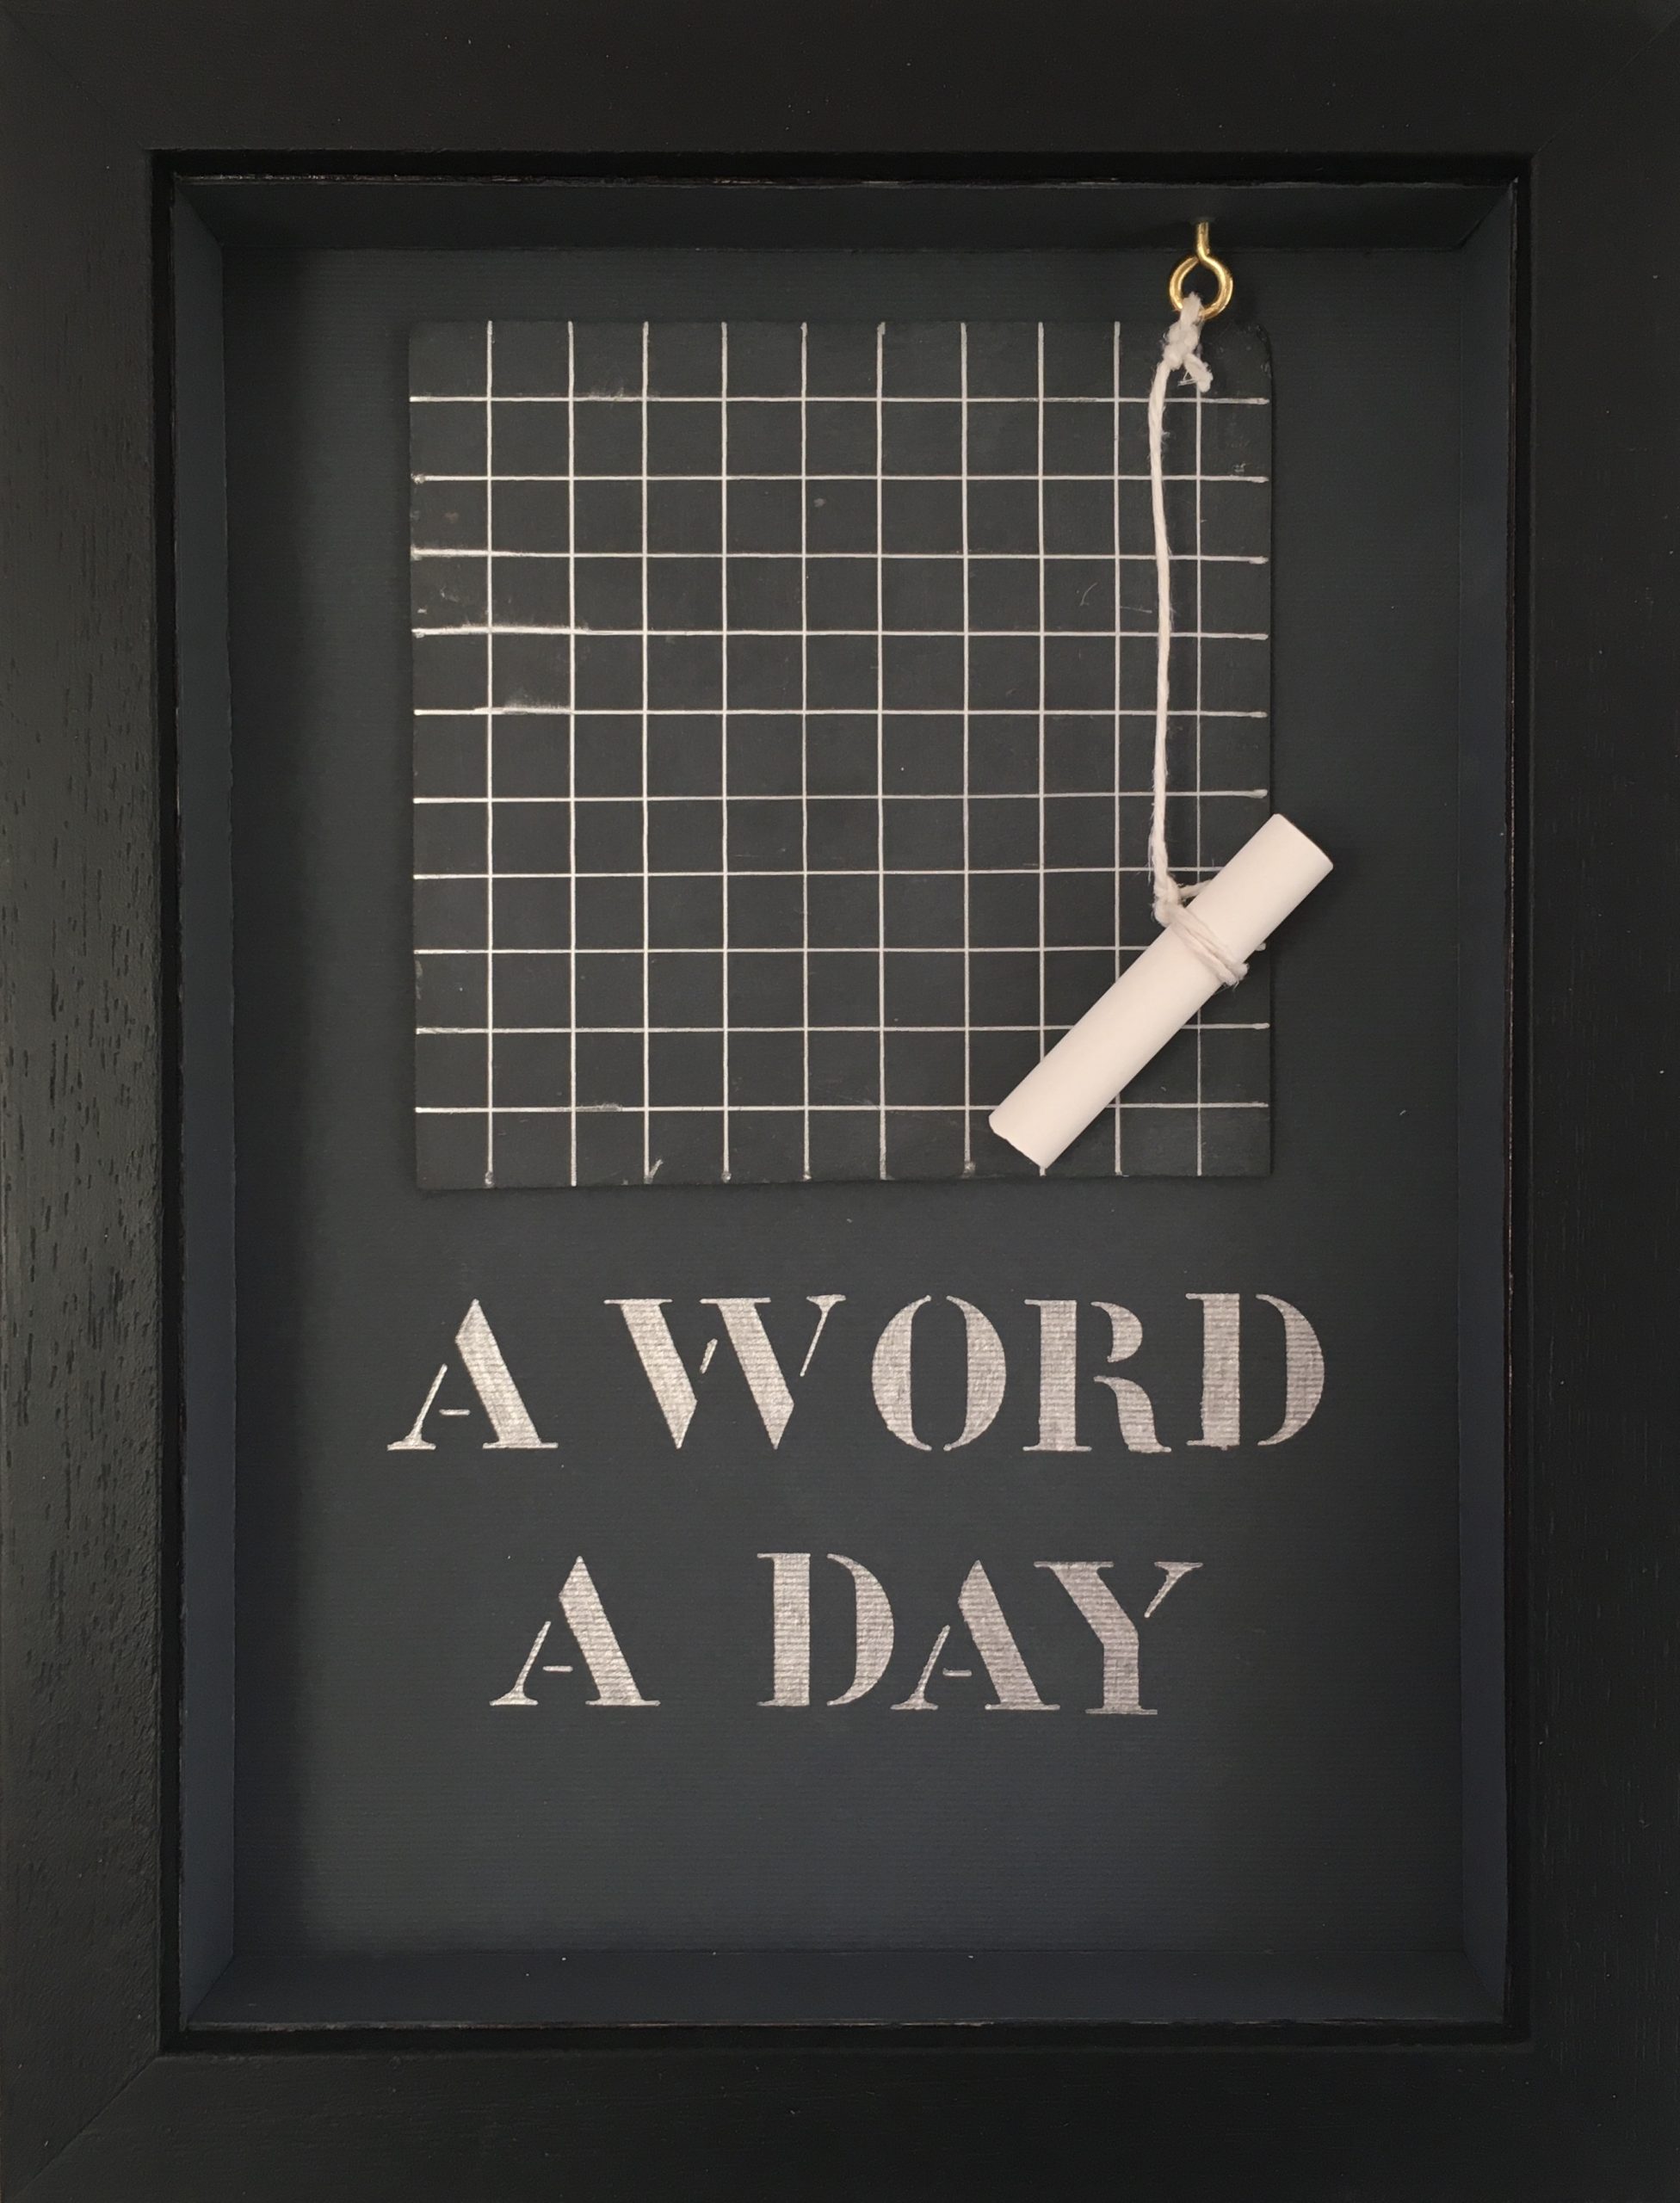 A word a day